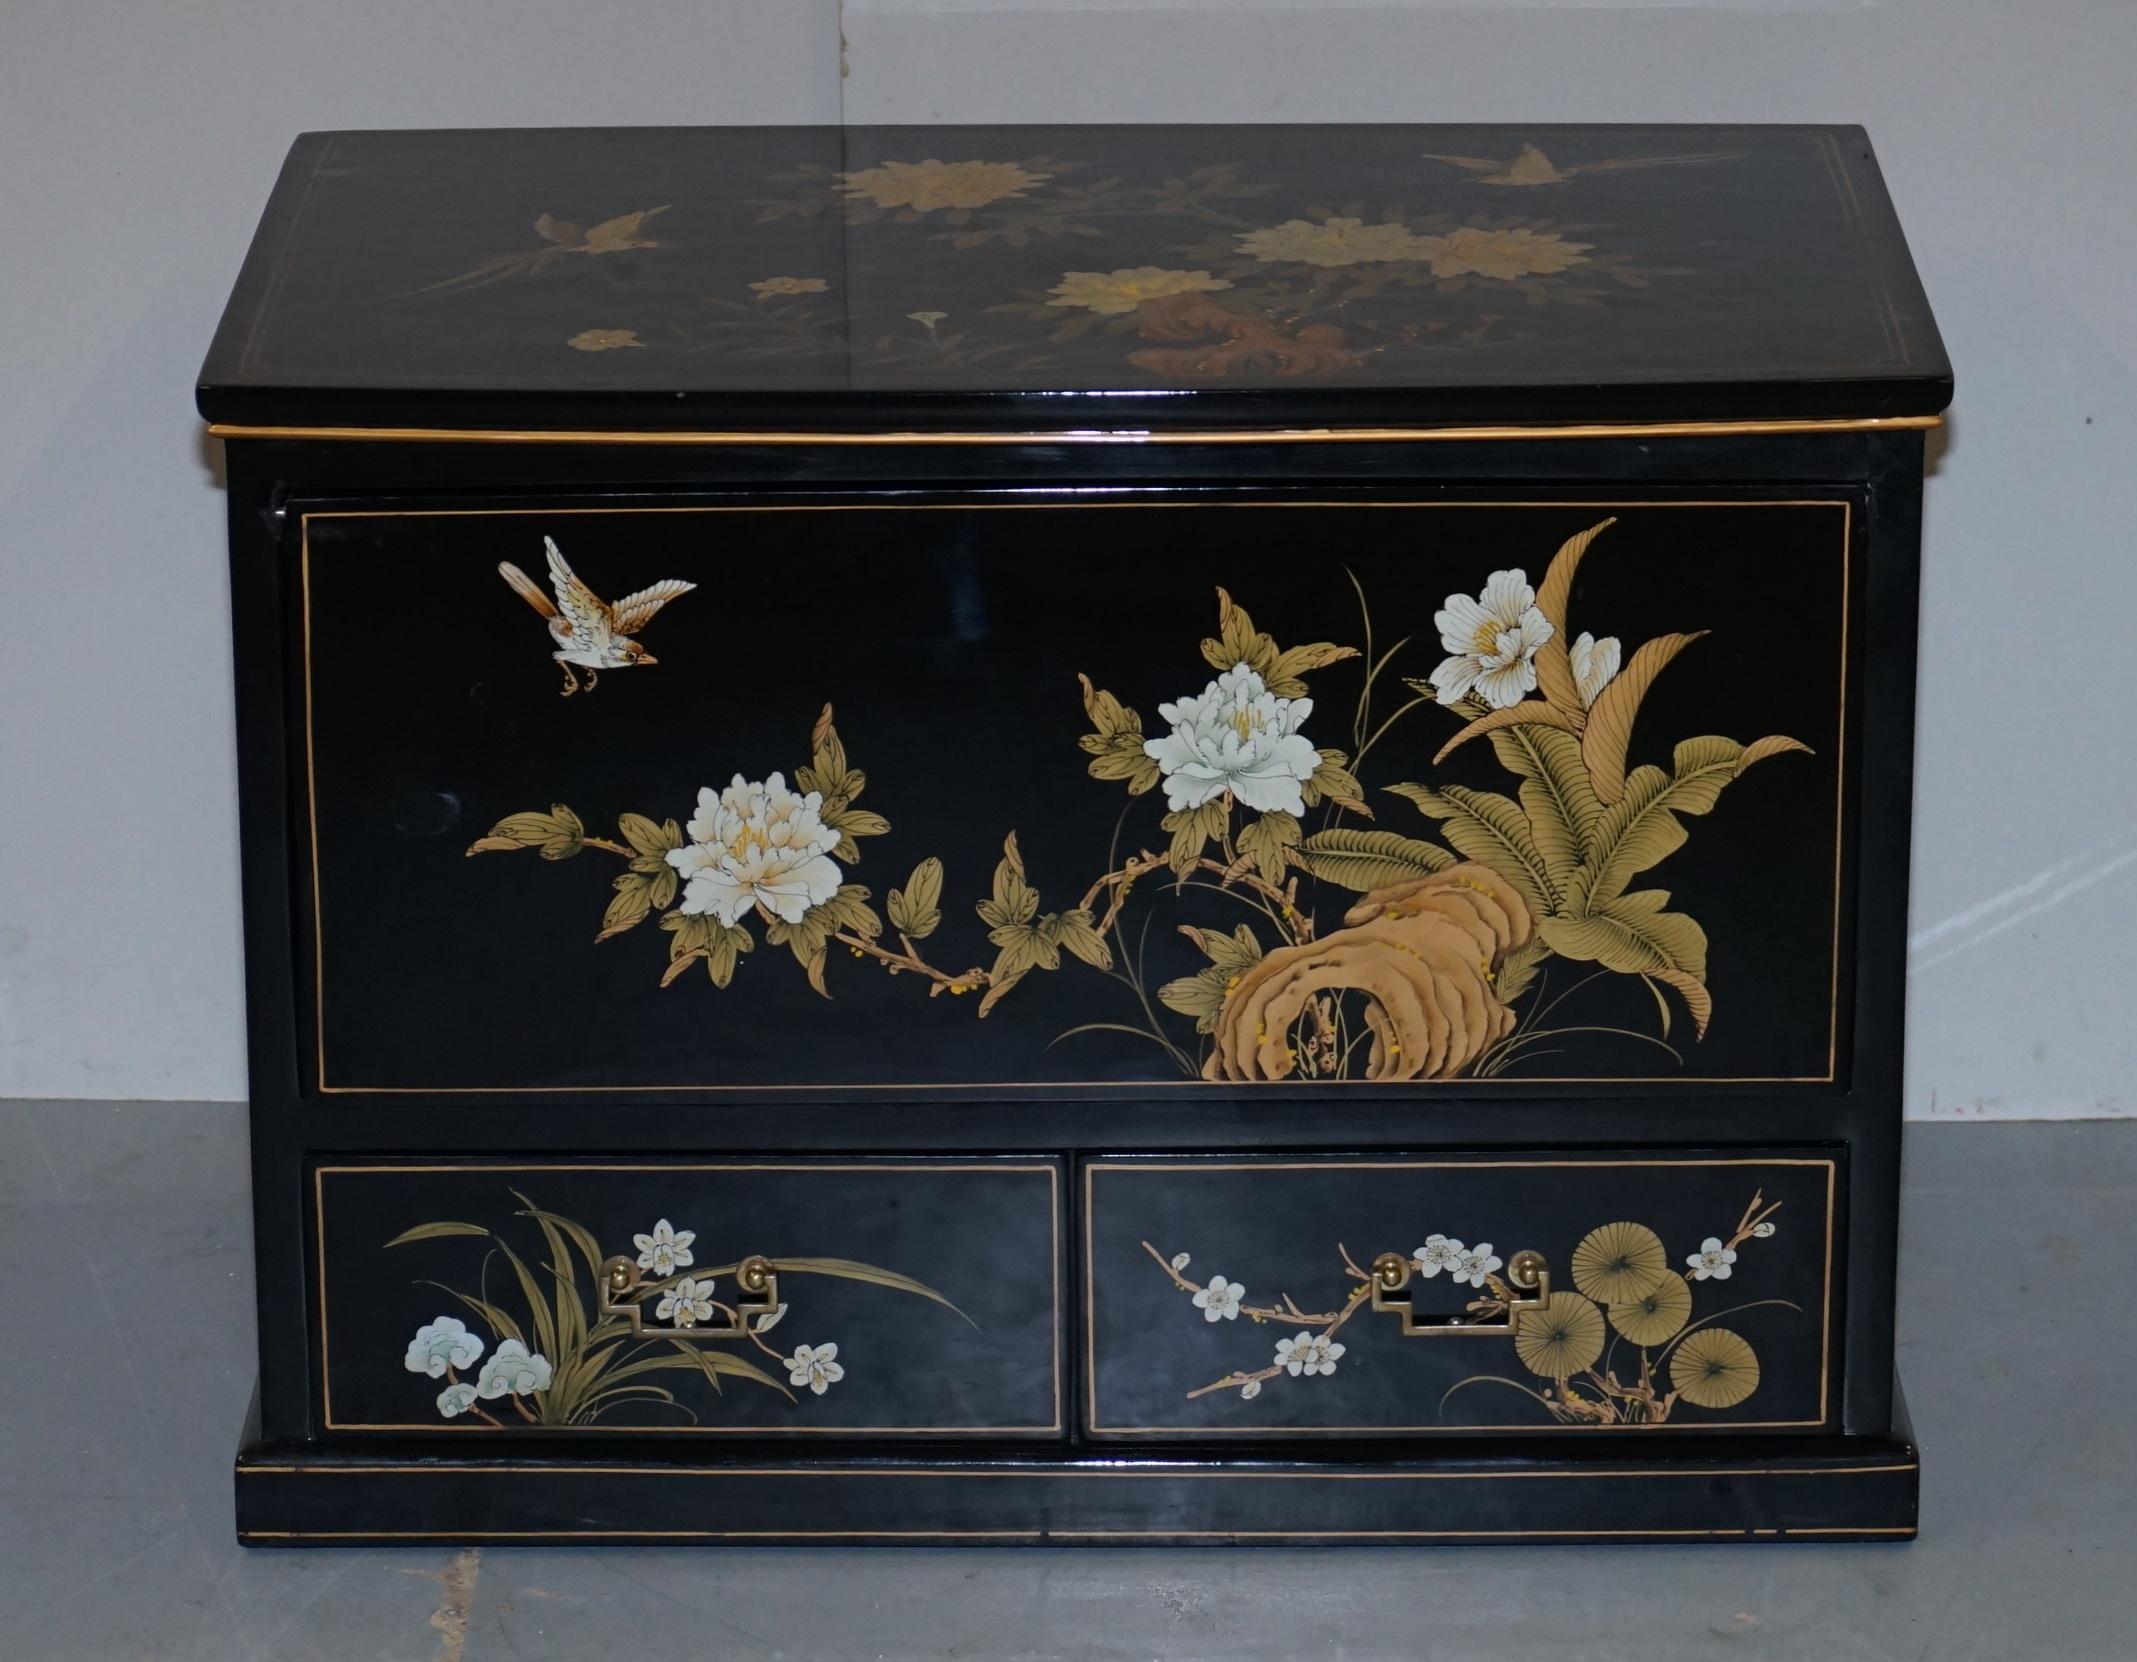 We are delighted to offer this very decorative and extremely well made Chinese Chinoiserie black lacquered and hand painted TV media stand

A good looking and well made piece, the front is a retractable cupboard door which reveals your media boxes